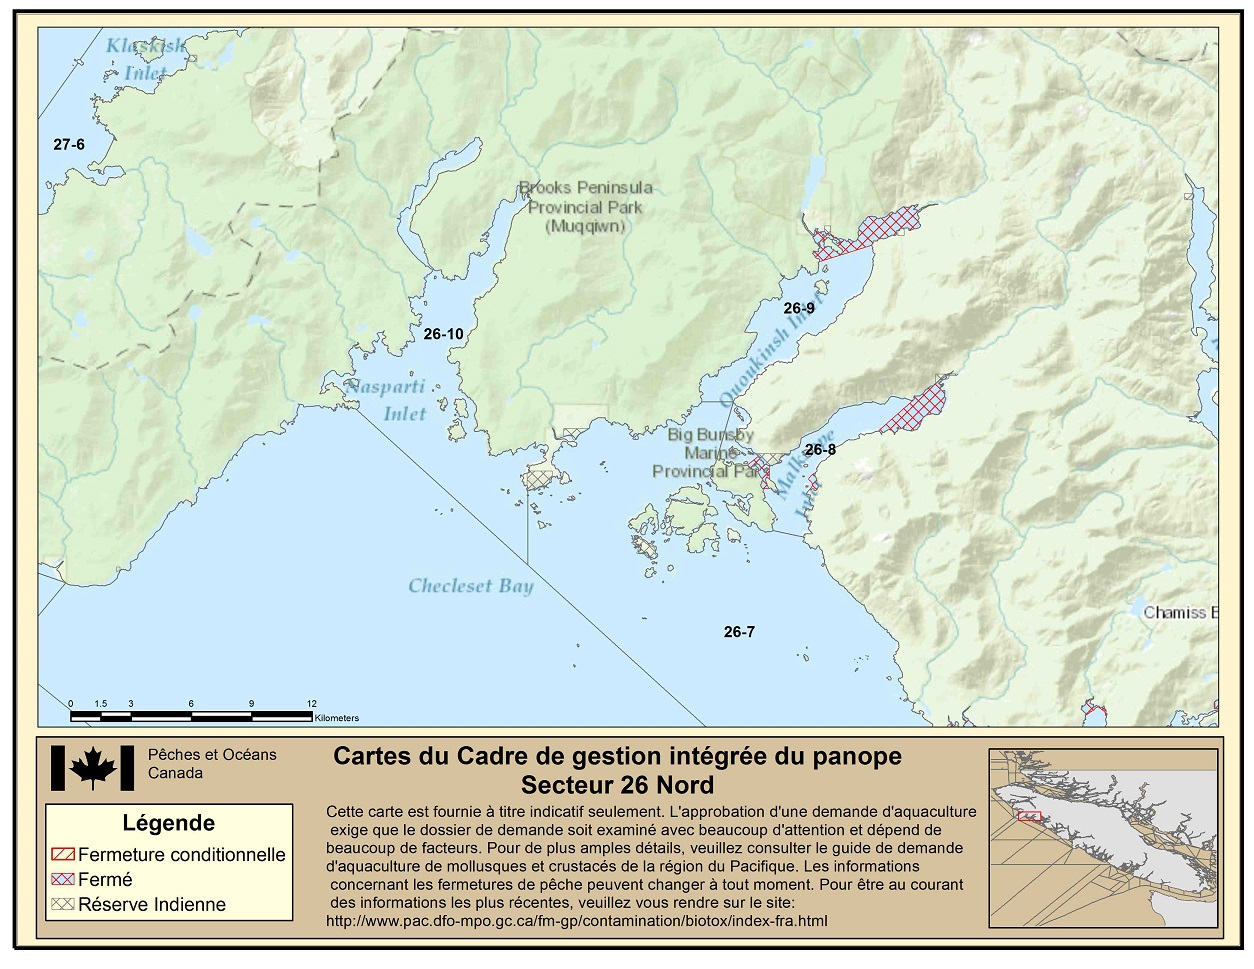 Map: Pacific Region Fisheries Management Area 26 North